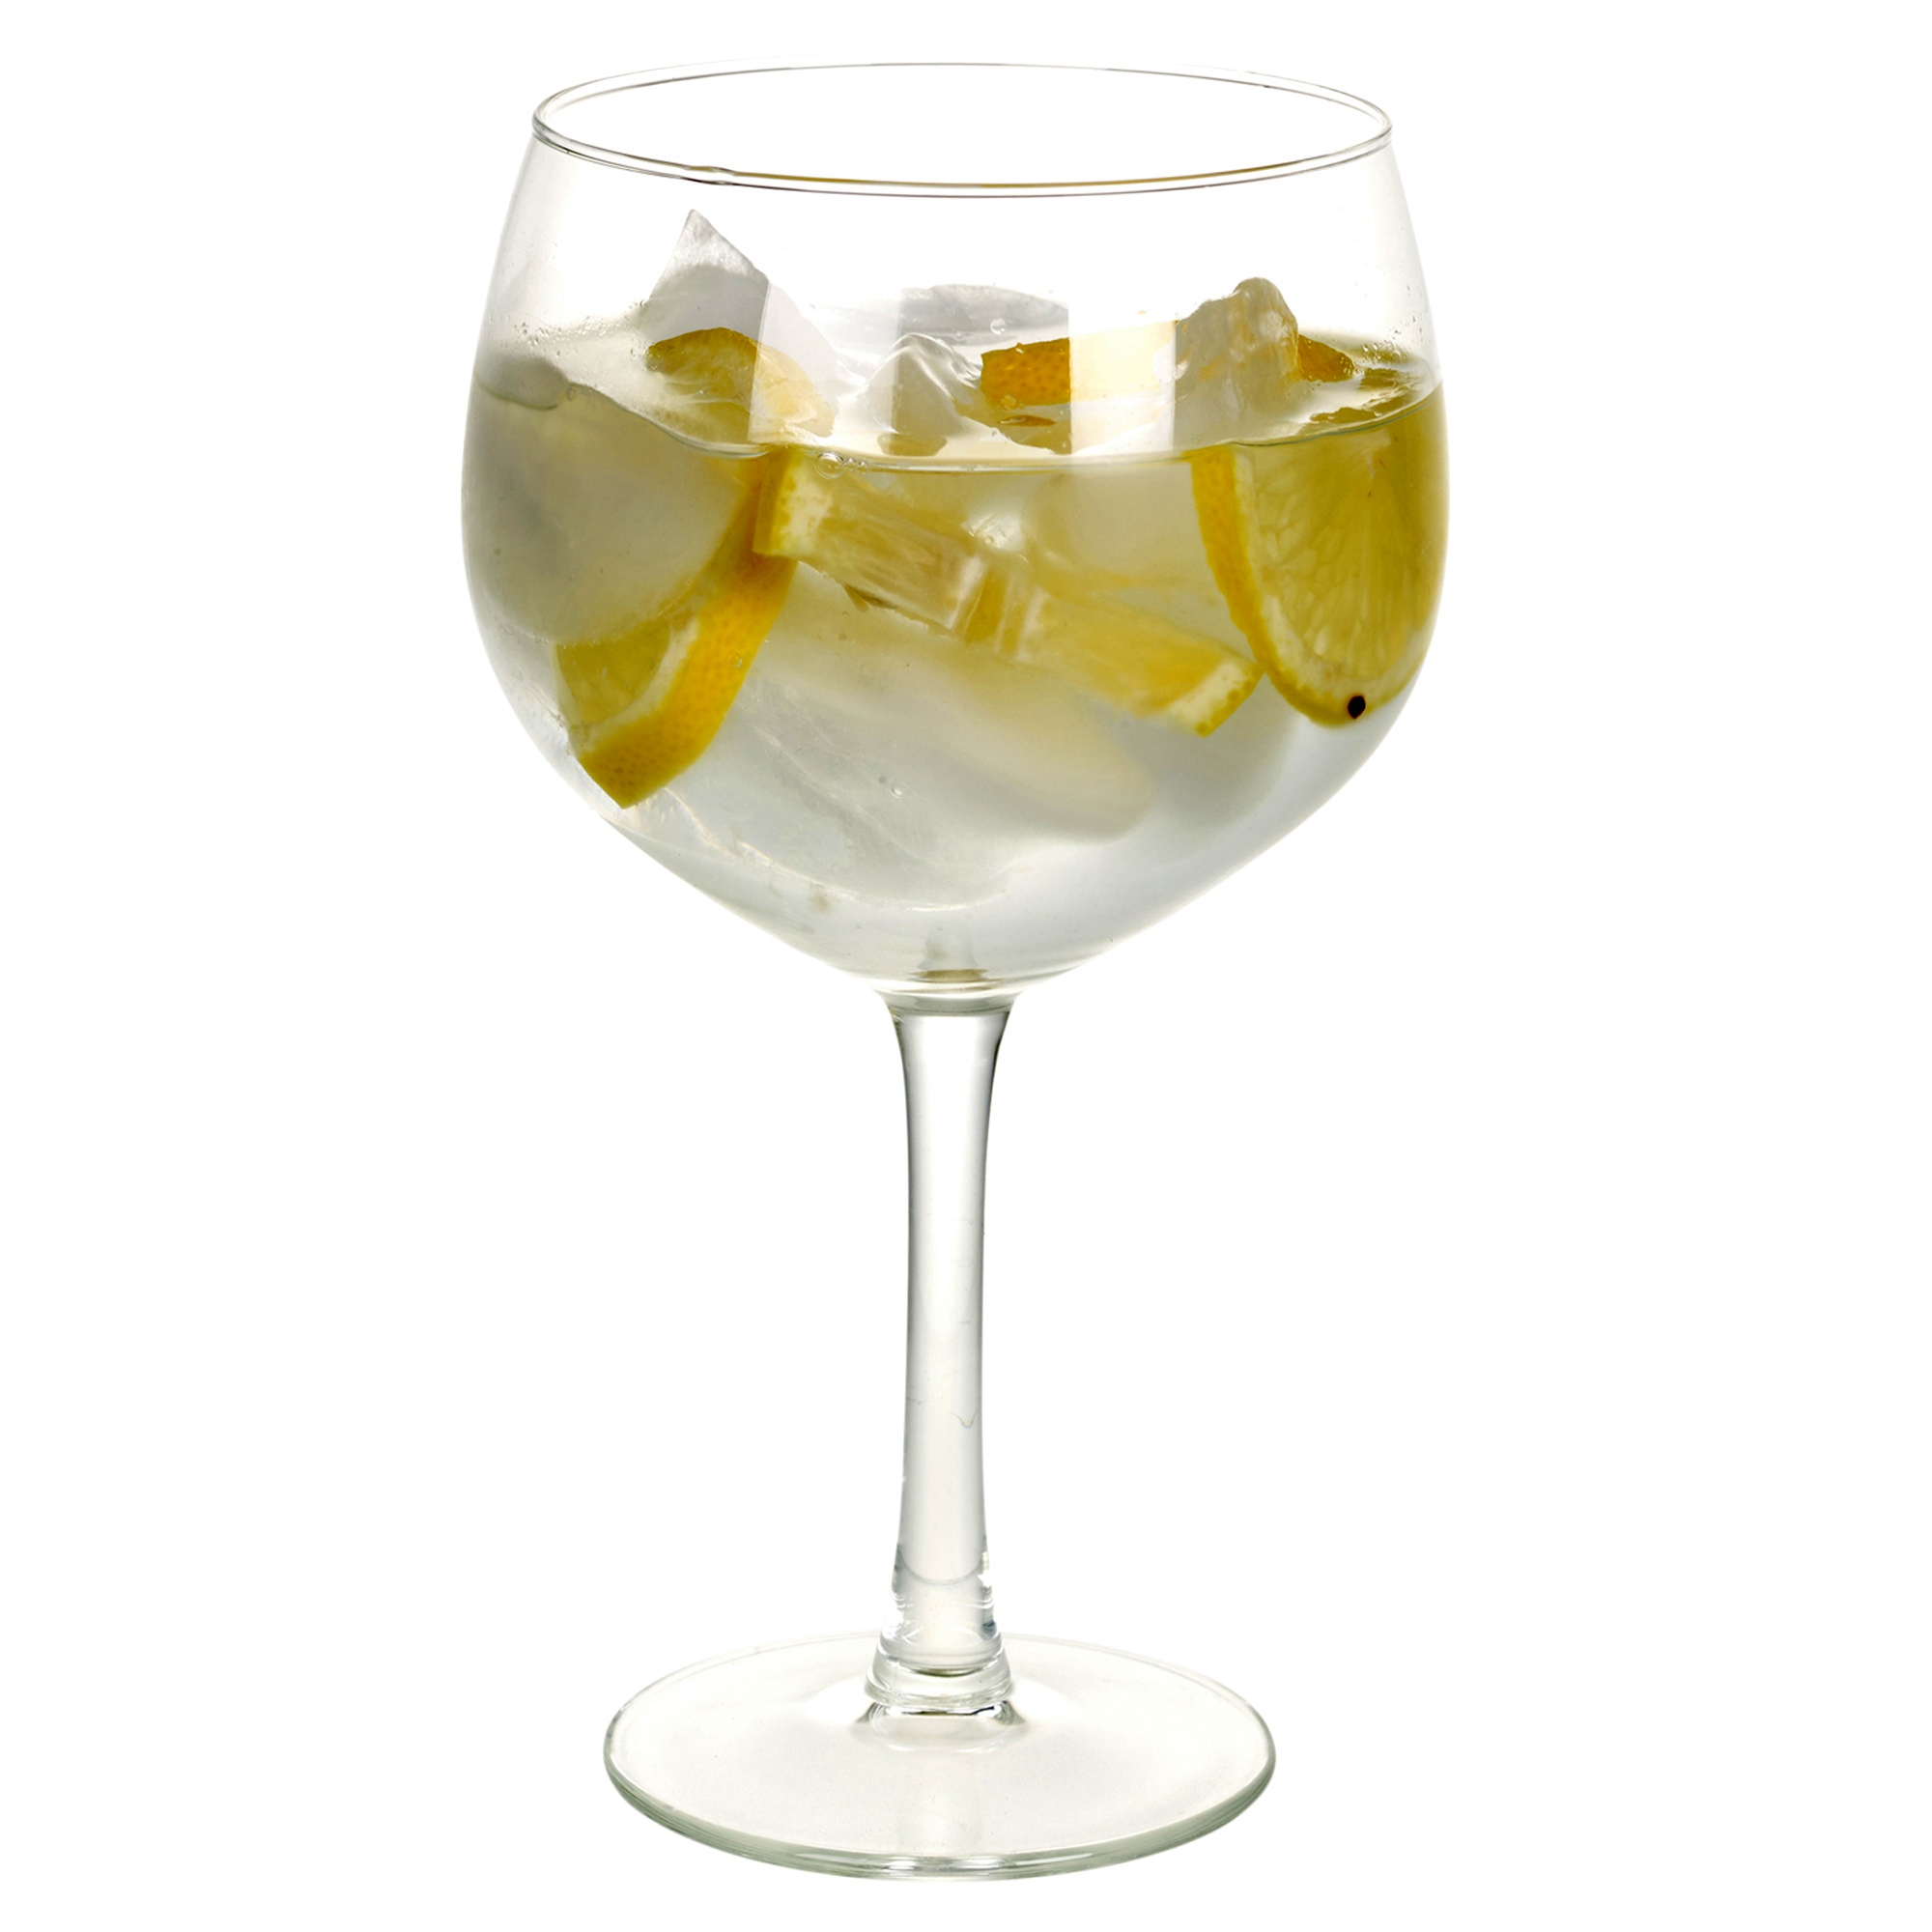 Download 4 8 12 Large 650ml Gin & Tonic Balloon Cocktail Drinking Wine Glasses G&T Set | eBay